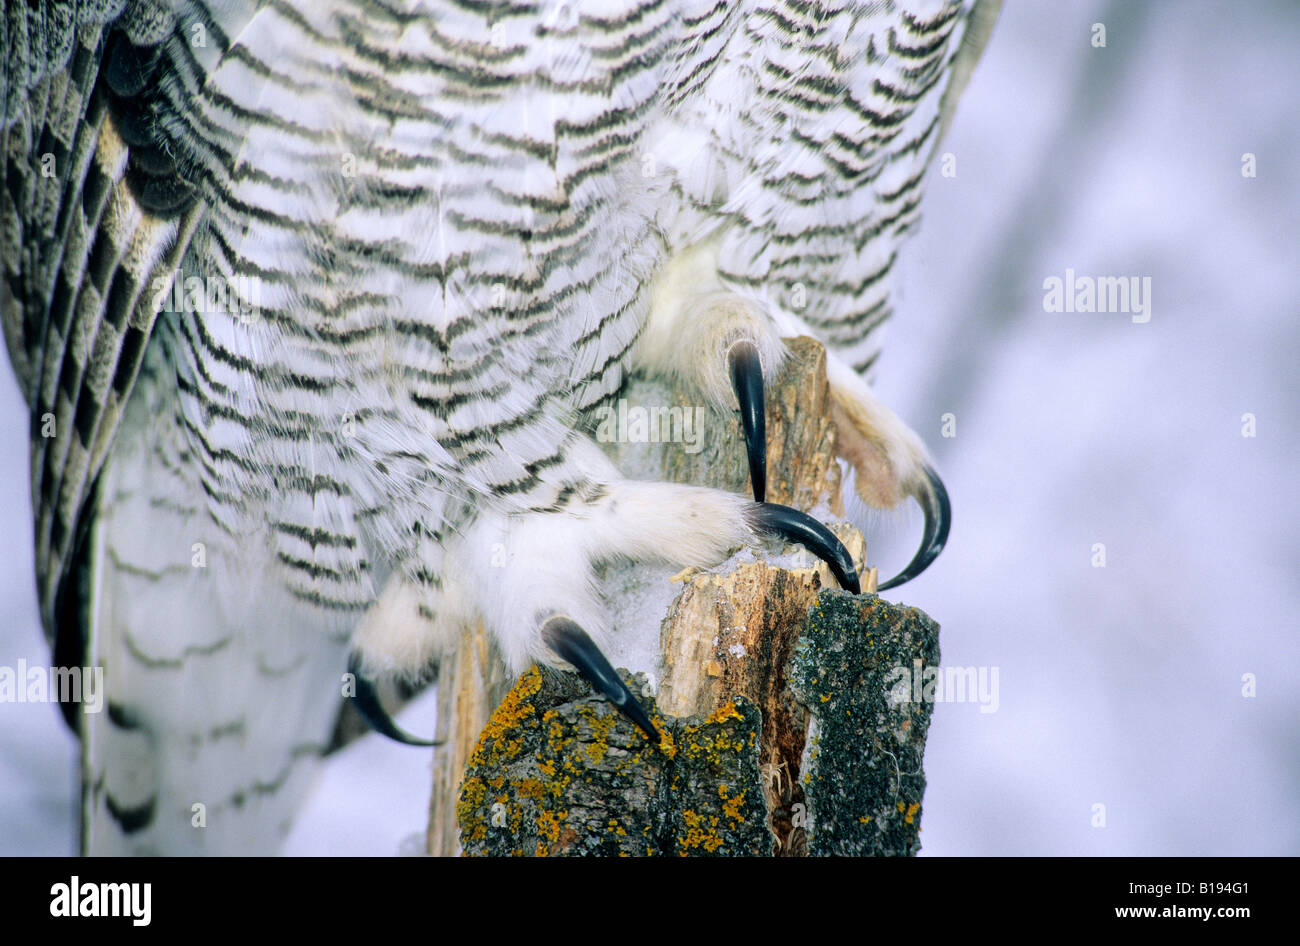 Talons on the feet of an adult great horned owl (Bubo virginianus), Alberta, Canada Stock Photo